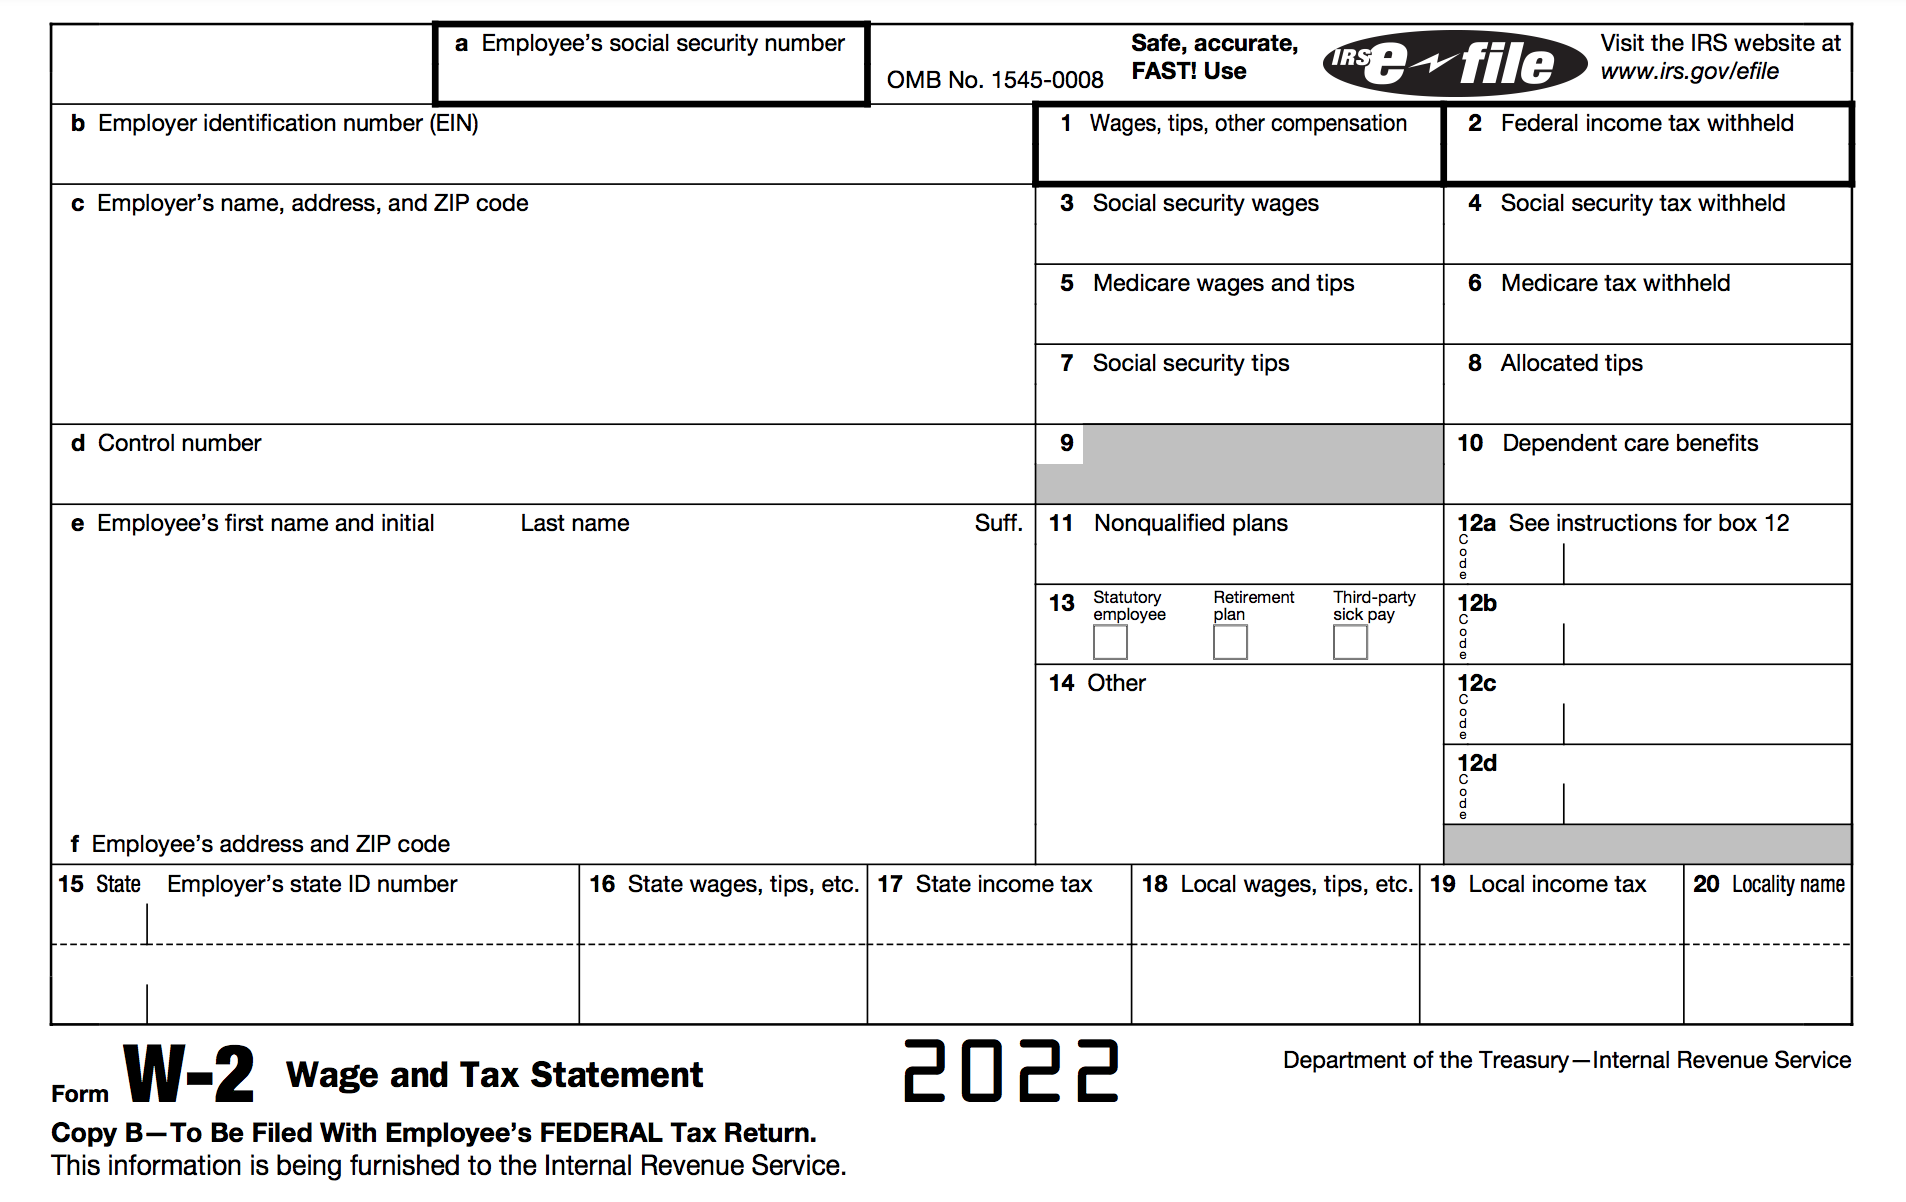 How To Fill Out A W-2 Tax Form | Smartasset intended for When Will 2022 W2 Forms Be Available